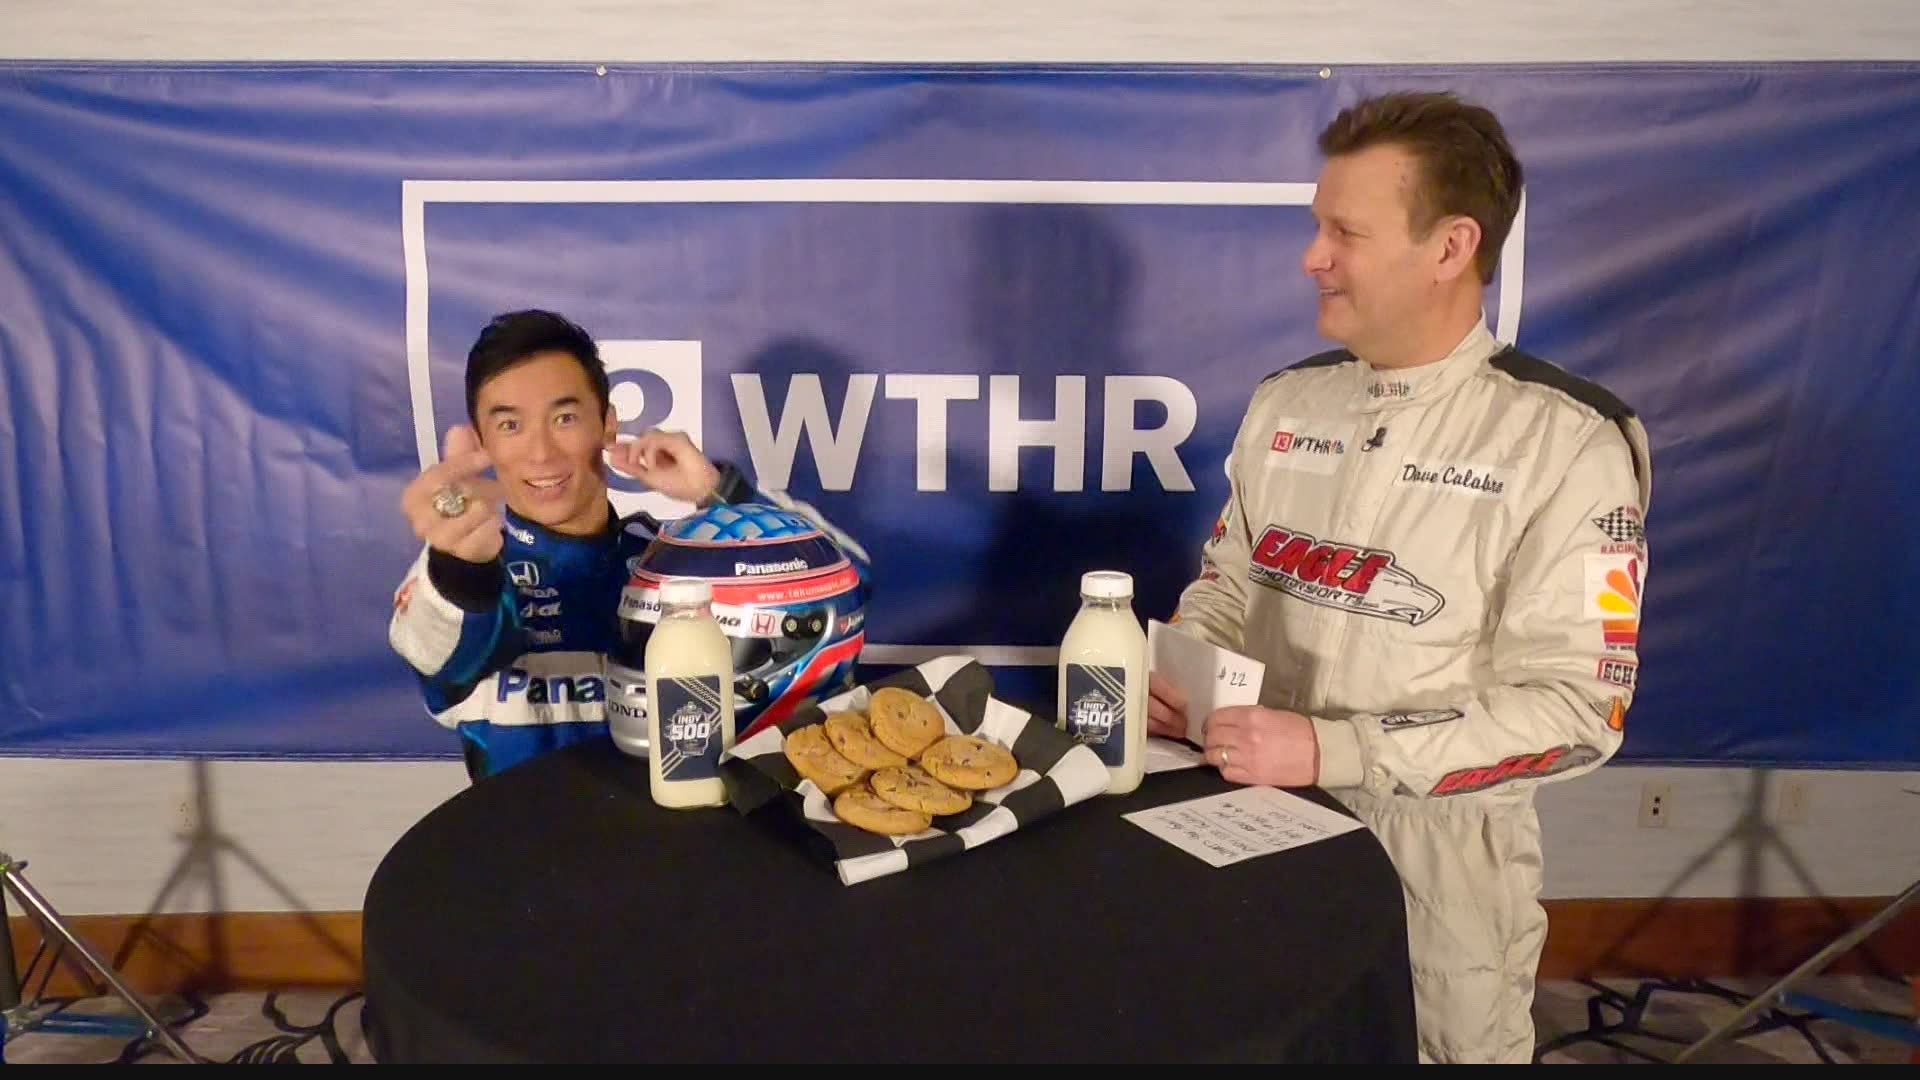 We ask the drivers a series of off-the-wall questions and we get their natural reactions.